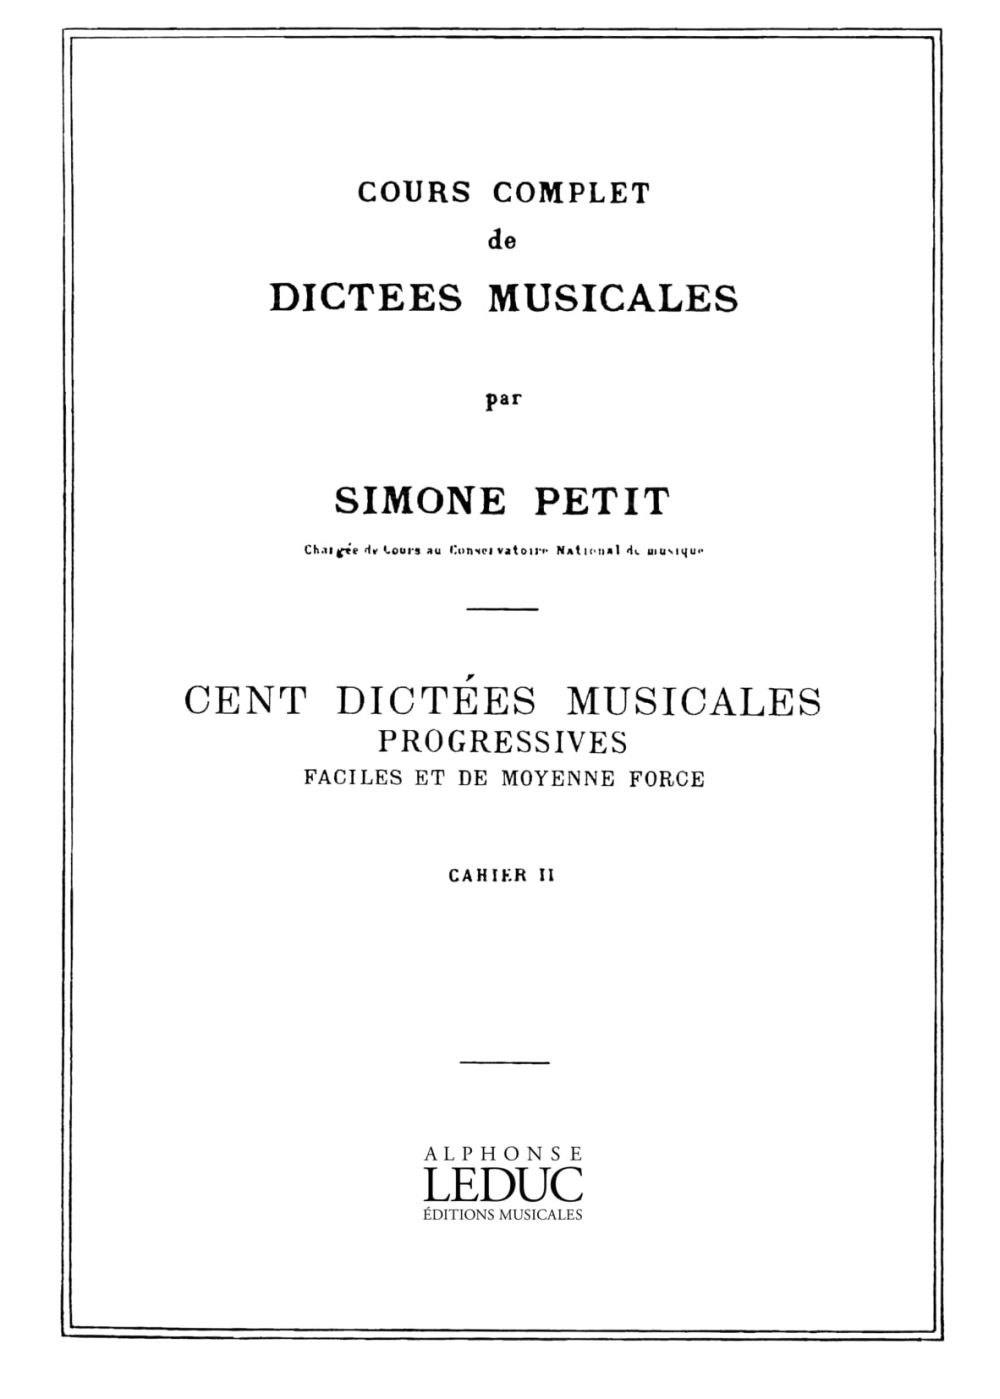 S Petit: Cours Compl.Dictees Musicales vol.2: 100 Dictees 1